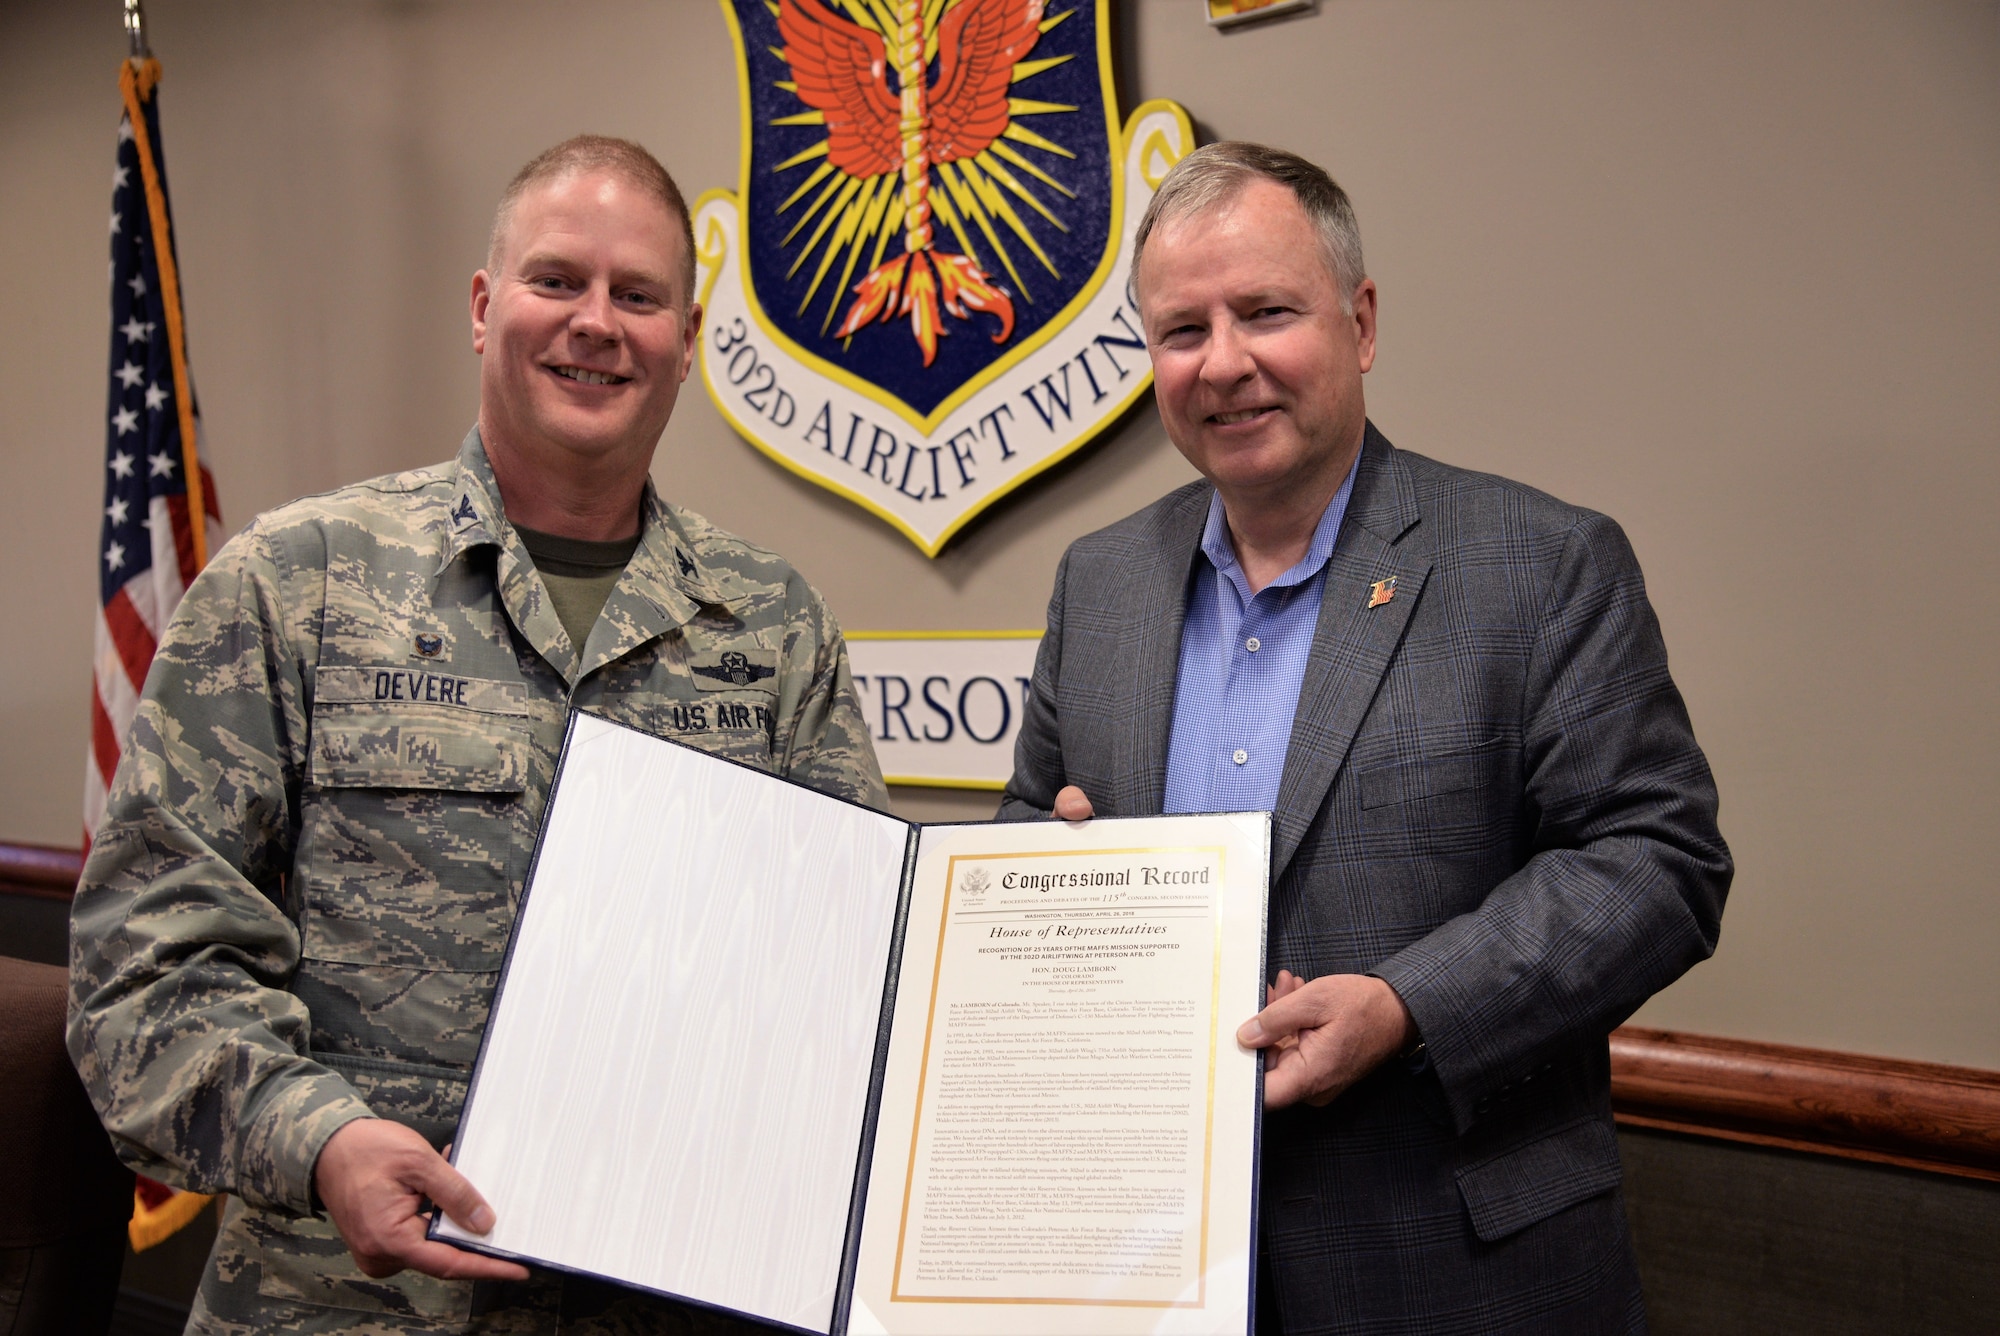 U.S. Rep. Doug Lamborn, presents a copy of the Congressional Record recognizing the Air Force Reserve’s 302nd Airlift Wing for its 25 years supporting the Modular Airborne Fire Fighting System mission to Col. James DeVere, the 302nd AW commander, at Peterson Air Force Base, Colorado, June 1, 2018. Lamborn came to the wing on an official visit to discuss the MAFFS mission with DeVere. Lamborn’s proclamation was officially added to the U.S. House of Representatives Congressional Record April 26, 2018. (U.S. Air Force photo/Staff Sgt. Frank Casciotta)